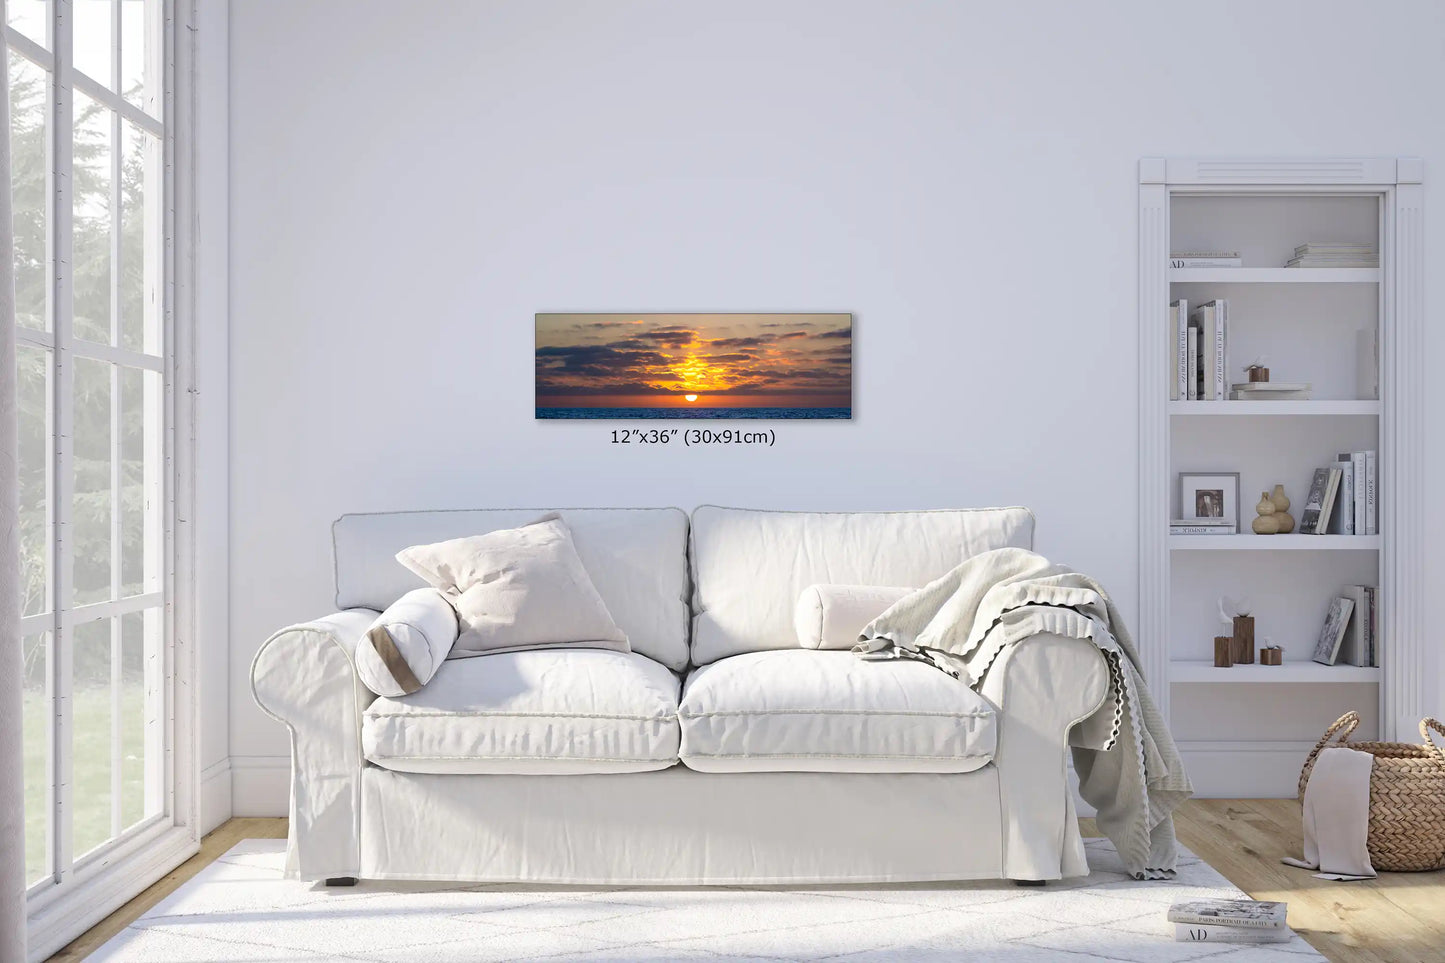 Cozy living room with a 12x36 inch canvas print of an ocean sunset, complementing the tranquil ambiance.